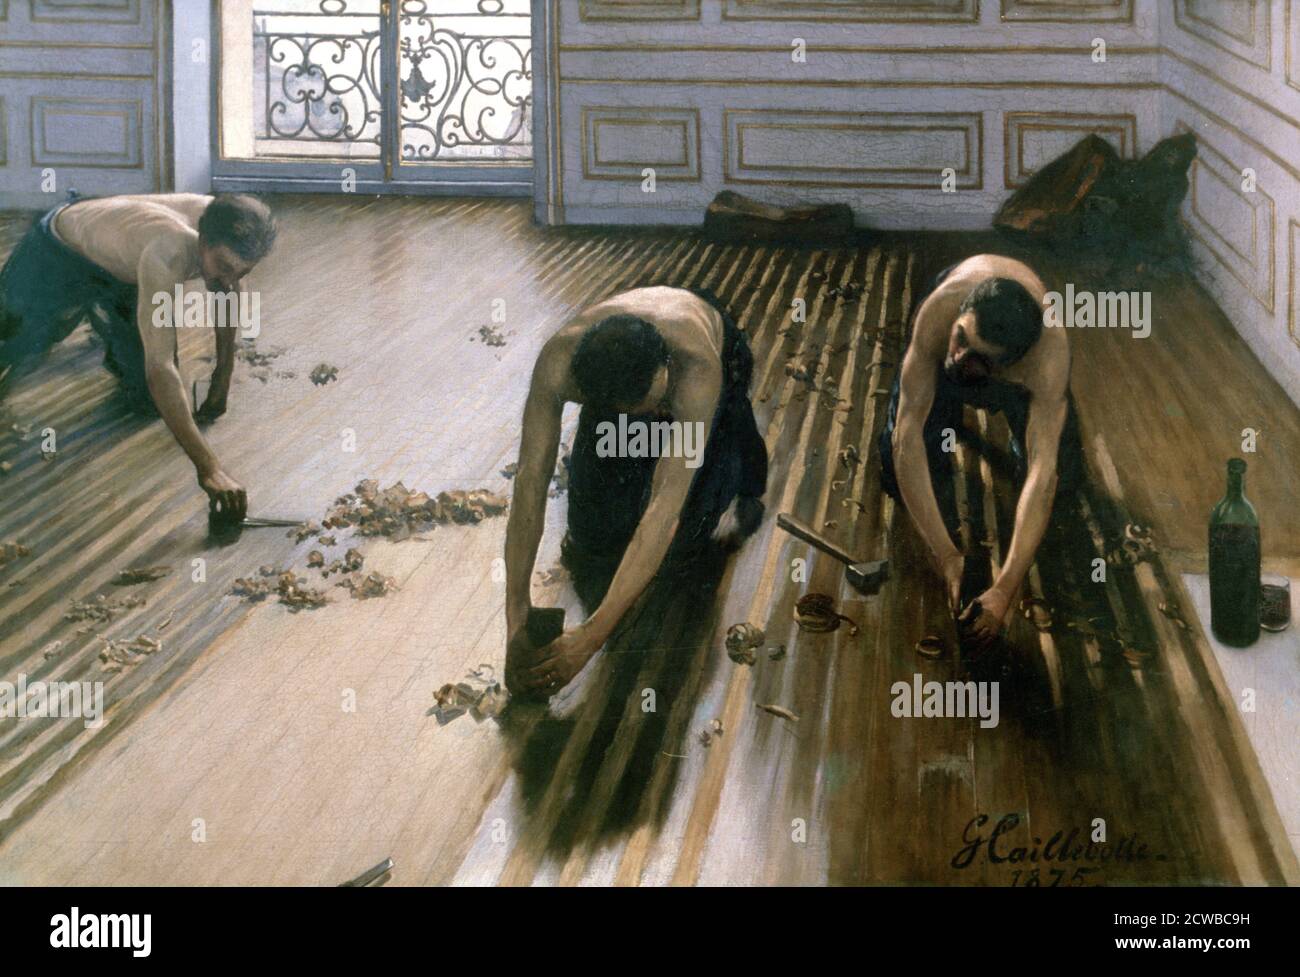 The Parquet Planers', 1875, by French artist Gustave Caillebotte. From the collection of the Musee d'Orsay, Paris, France. Stock Photo